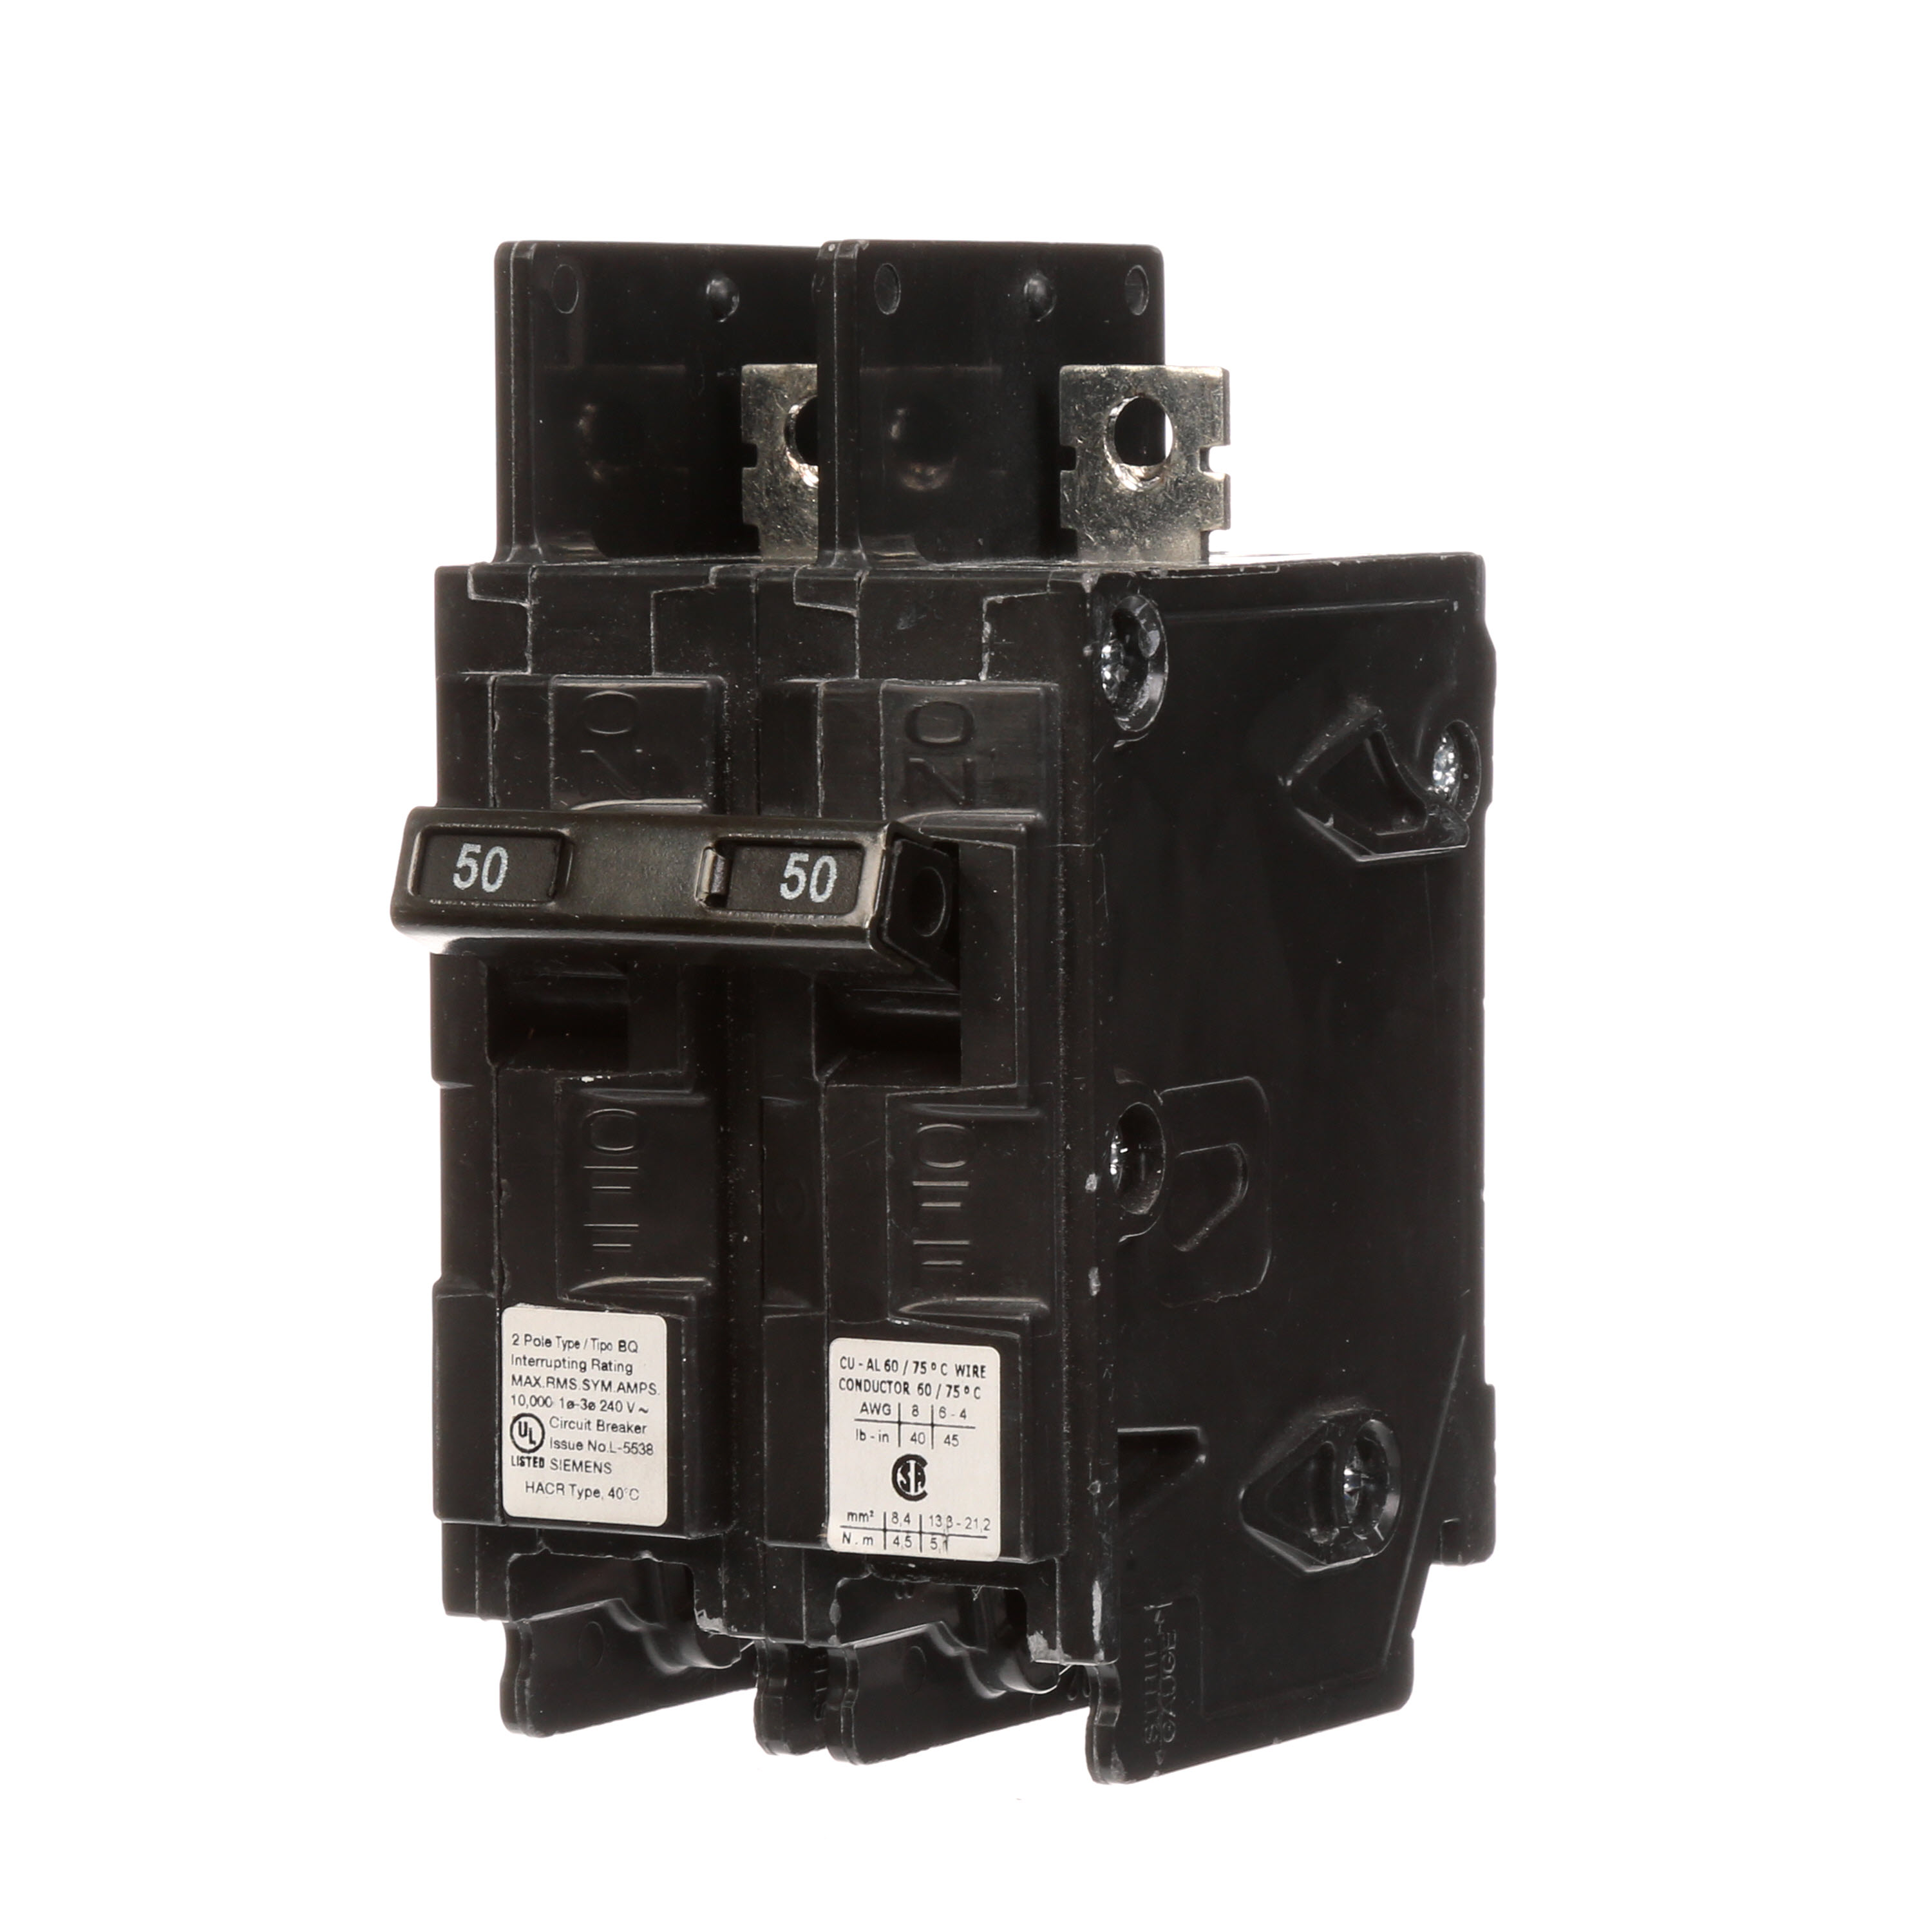 Siemens Low Voltage Molded Case Circuit Breakers General Purpose MCCBs are Circuit Protection Molded Case Circuit Breakers. 2-Pole Common-Trip circuit breaker type BQ. Rated 240V (050A) (AIR 10 kA). Special features Load side lugs are included.